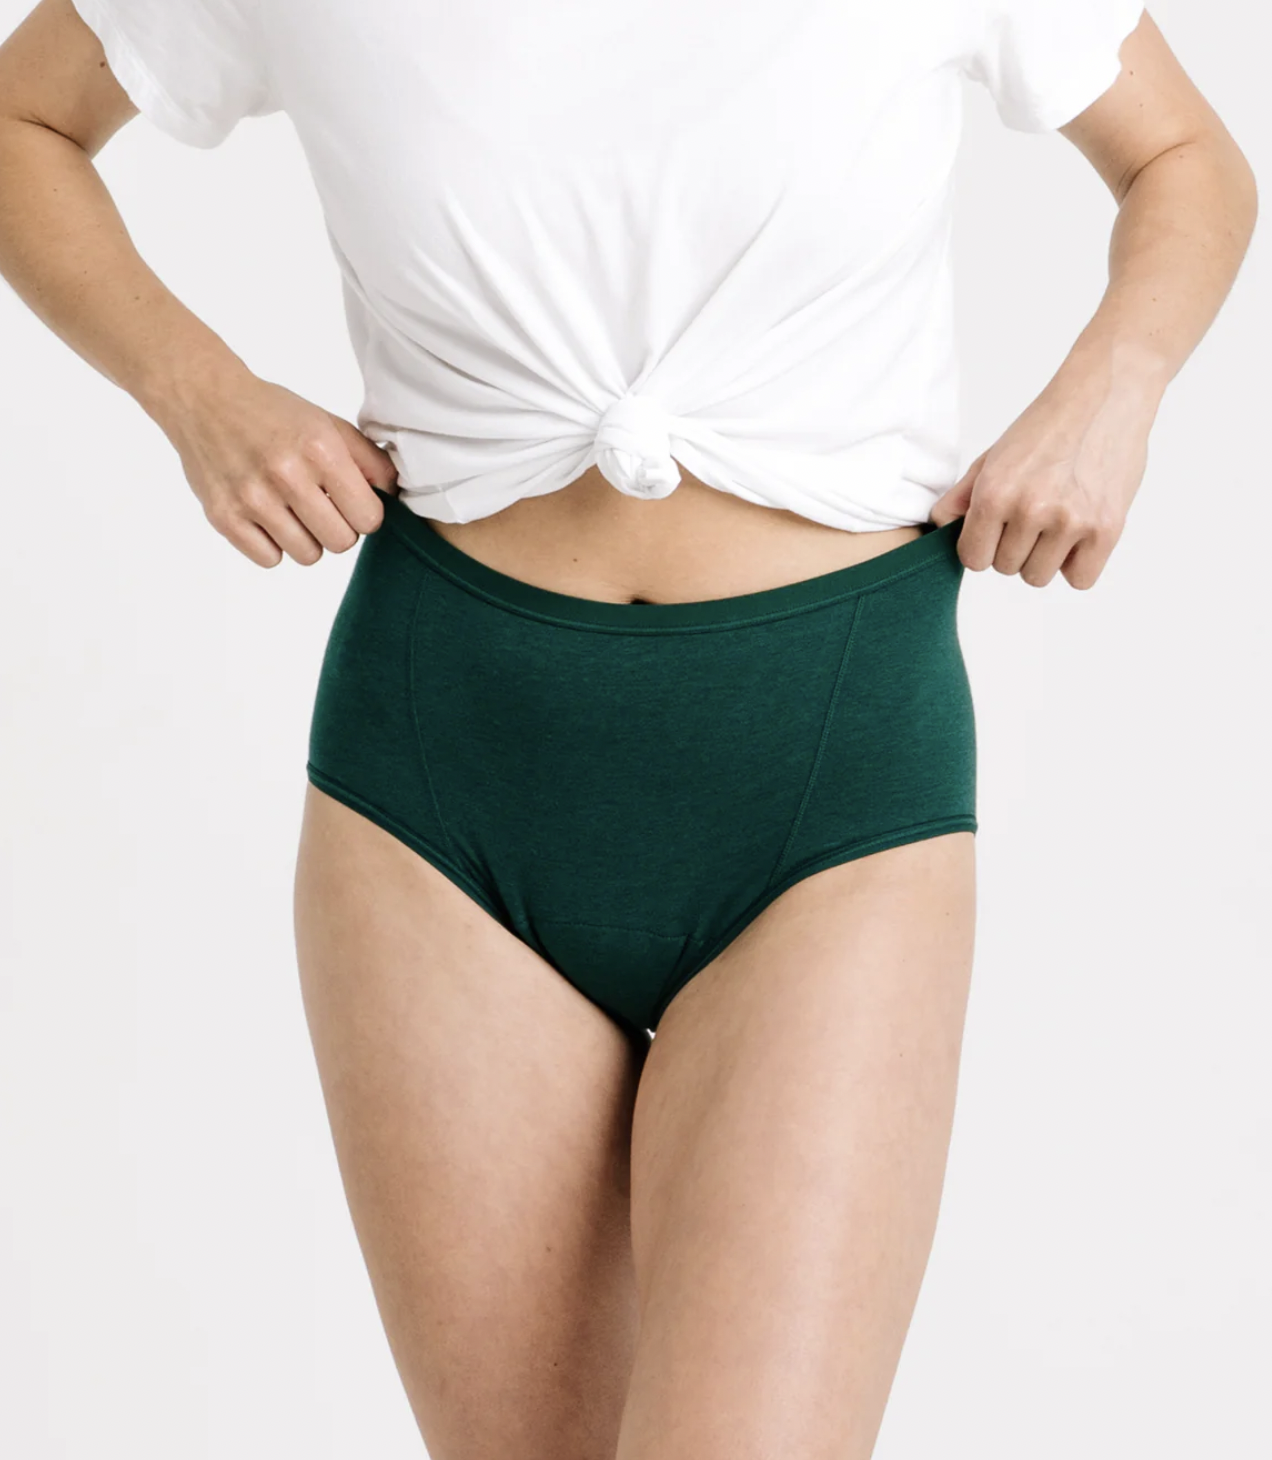 5 Period Panties (Other Than Thinx) You Didn't Know You Needed - Brit + Co